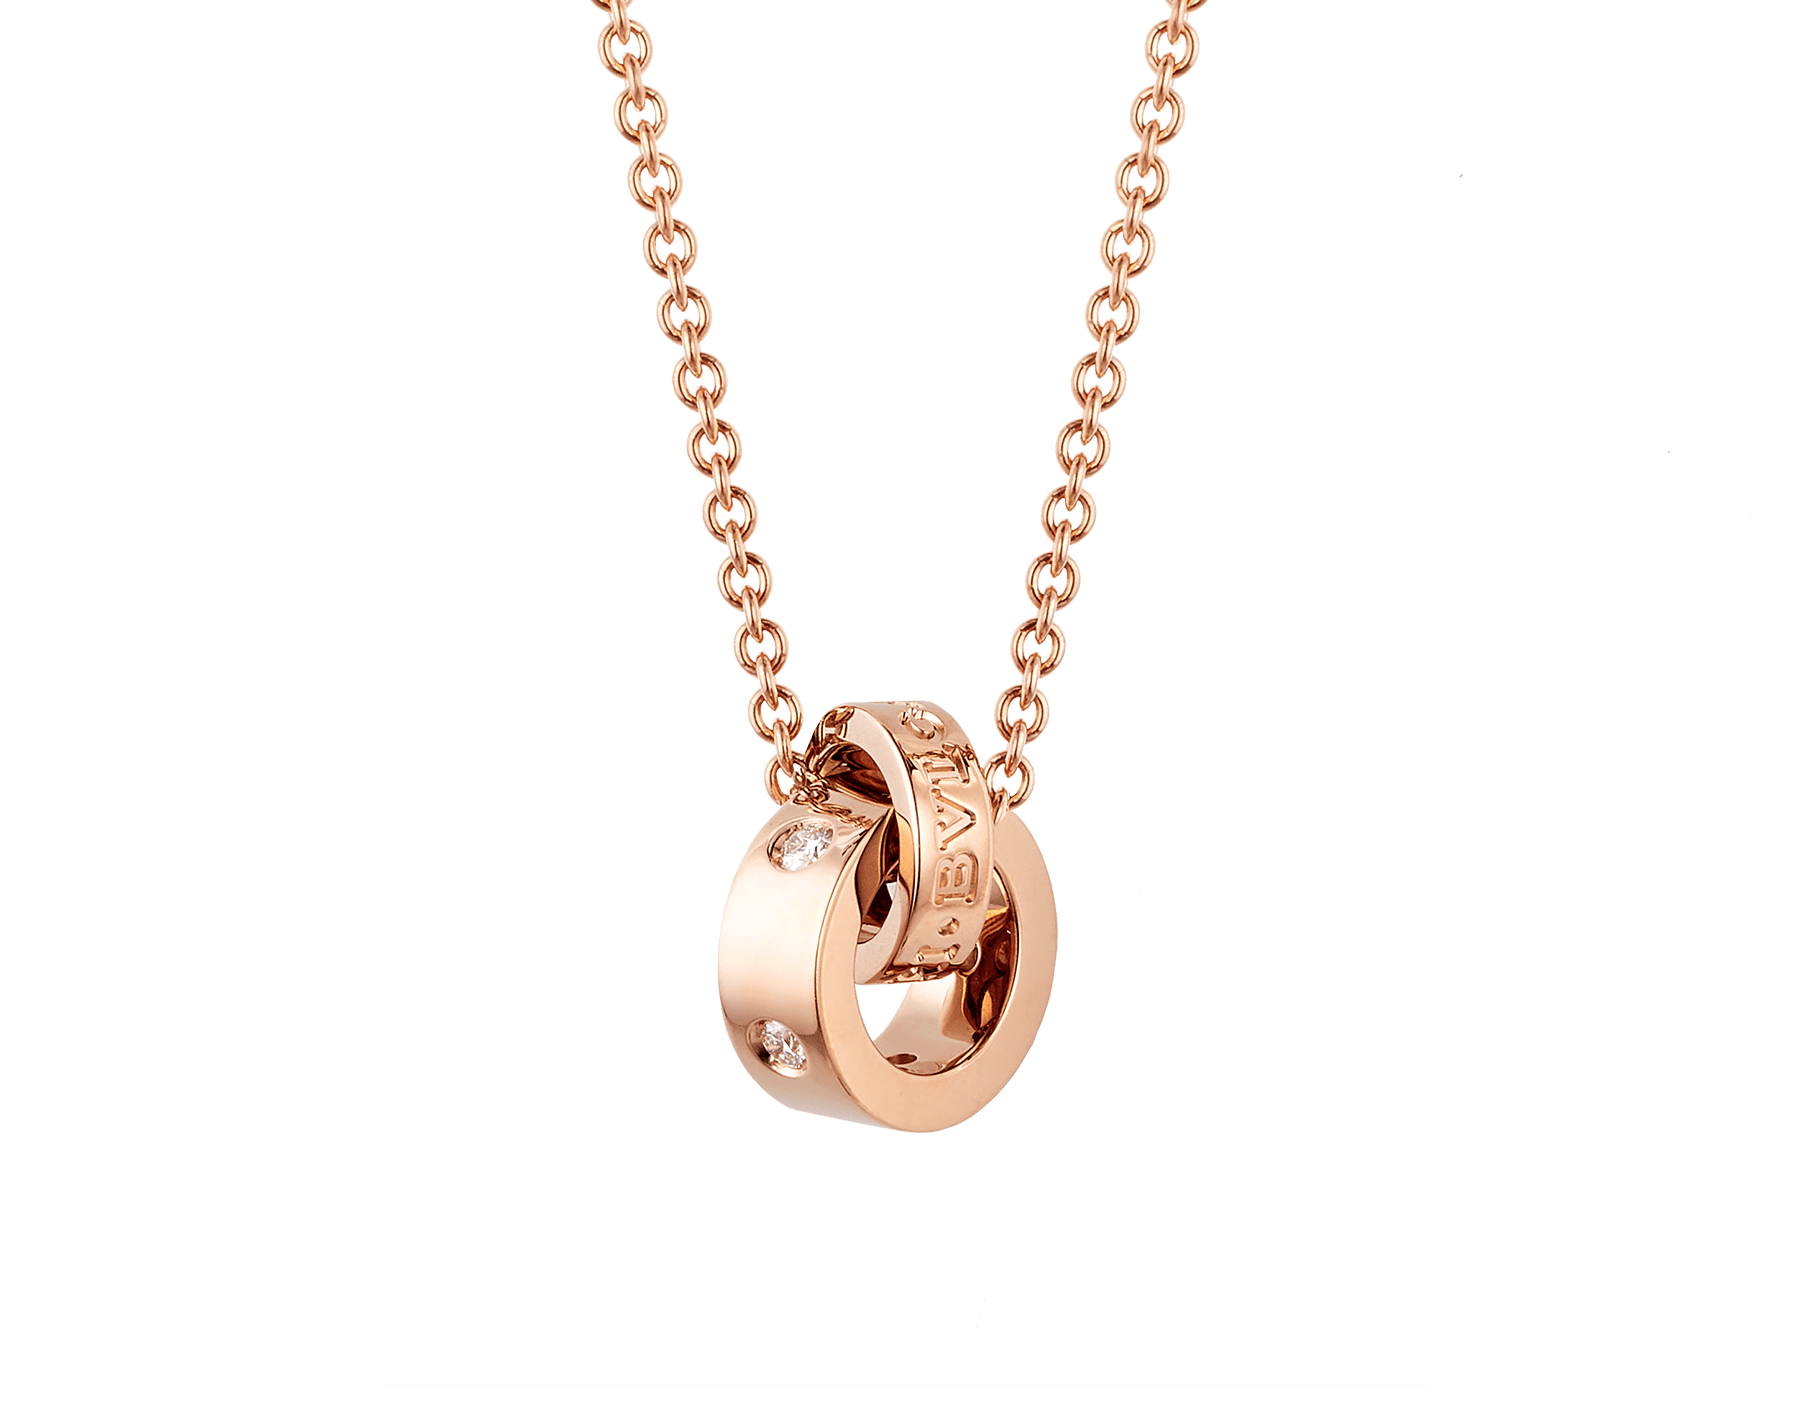 BVLGARI BVLGARI necklace with 18 kt rose gold chain and 18 kt rose gold pendant set with five diamonds. 354028 image 1